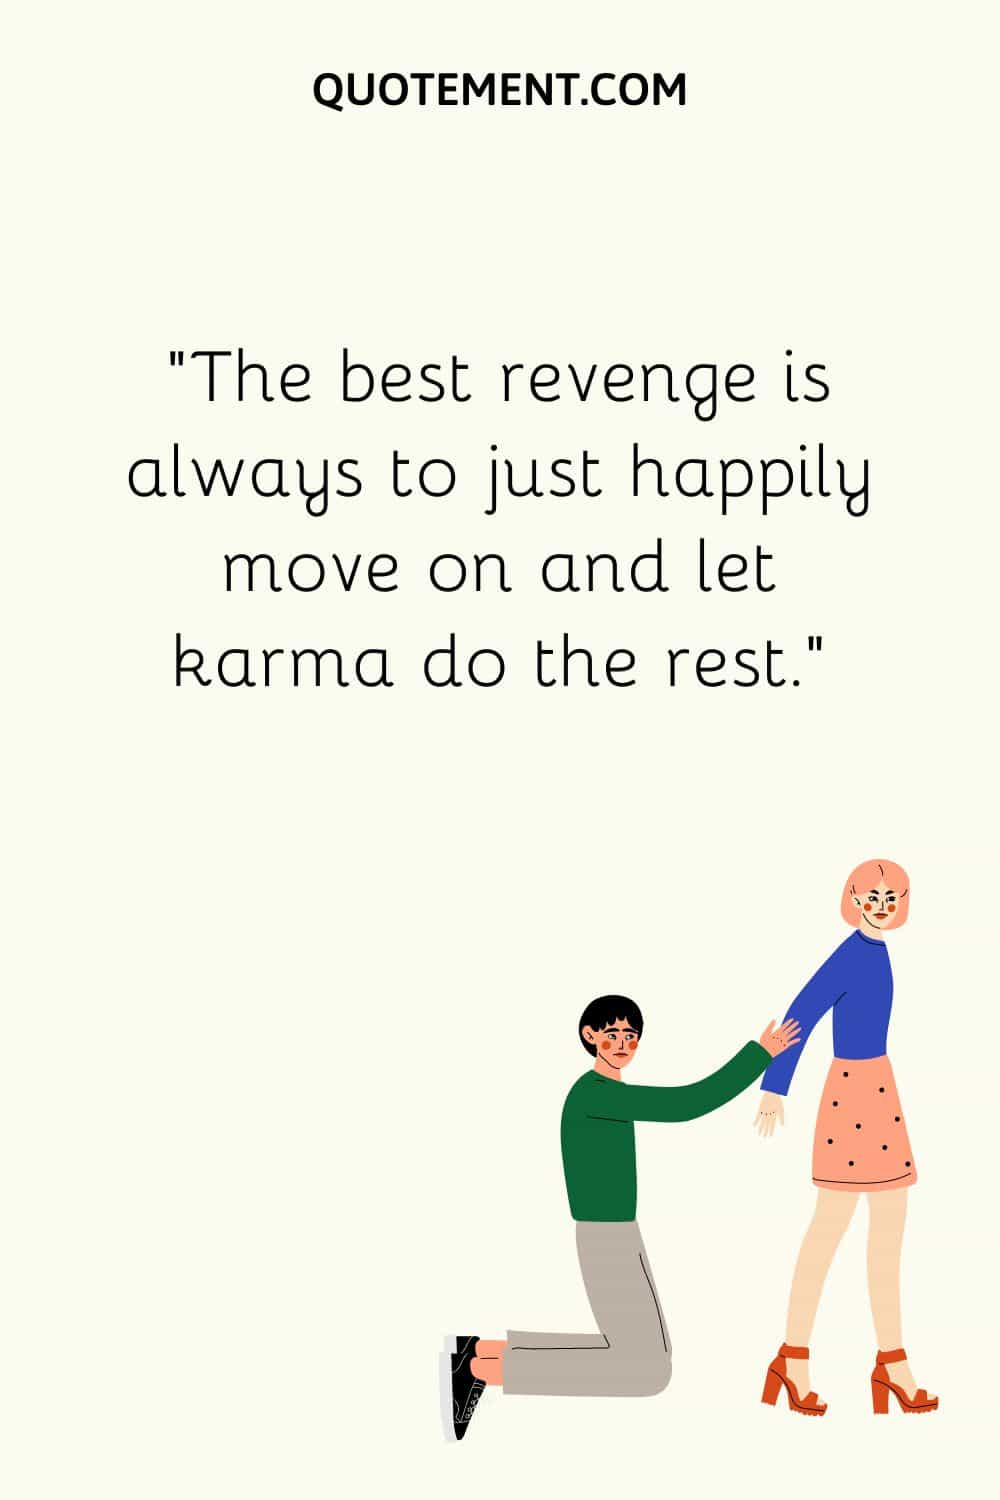 The best revenge is always to just happily move on and let karma do the rest